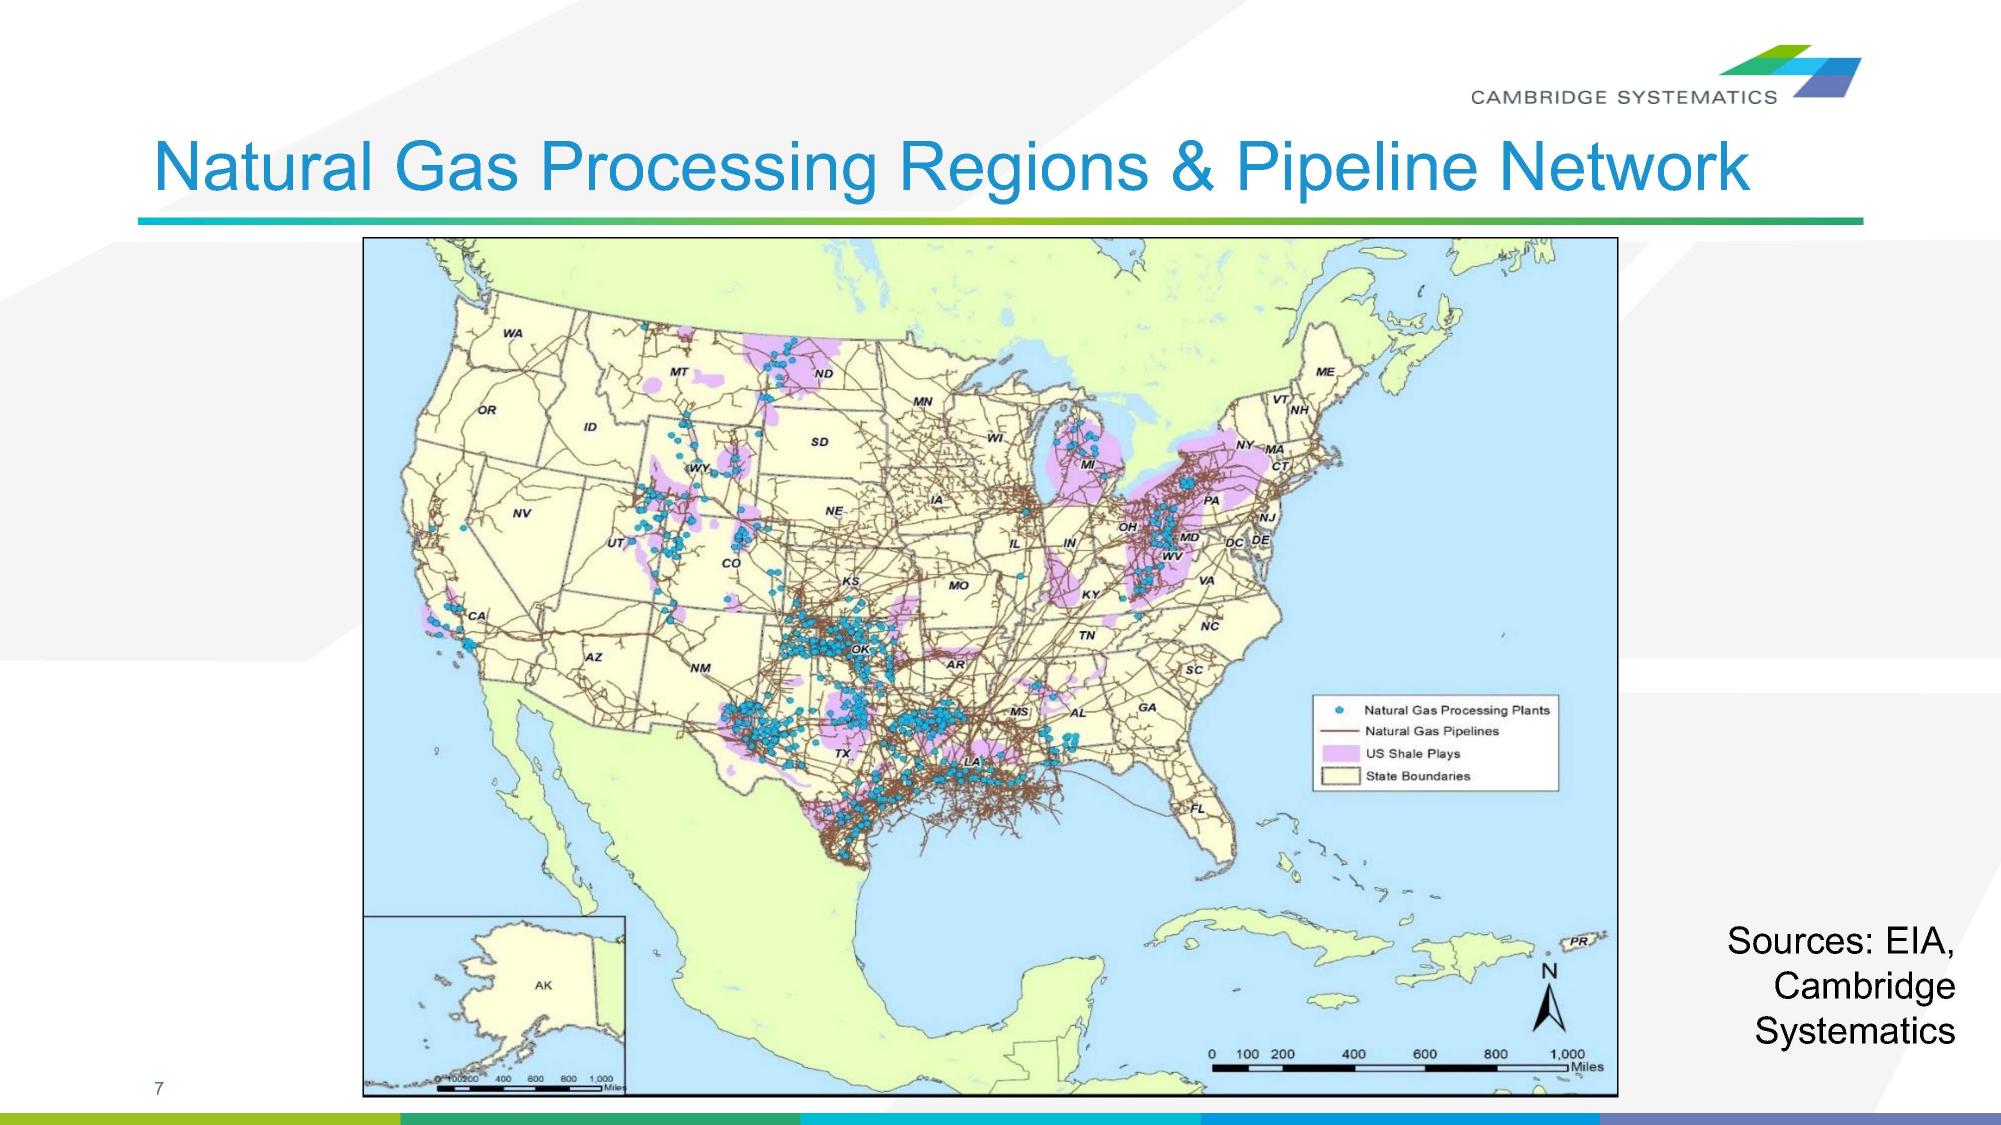 Natural Gas Processing Regions & Pipeline Network